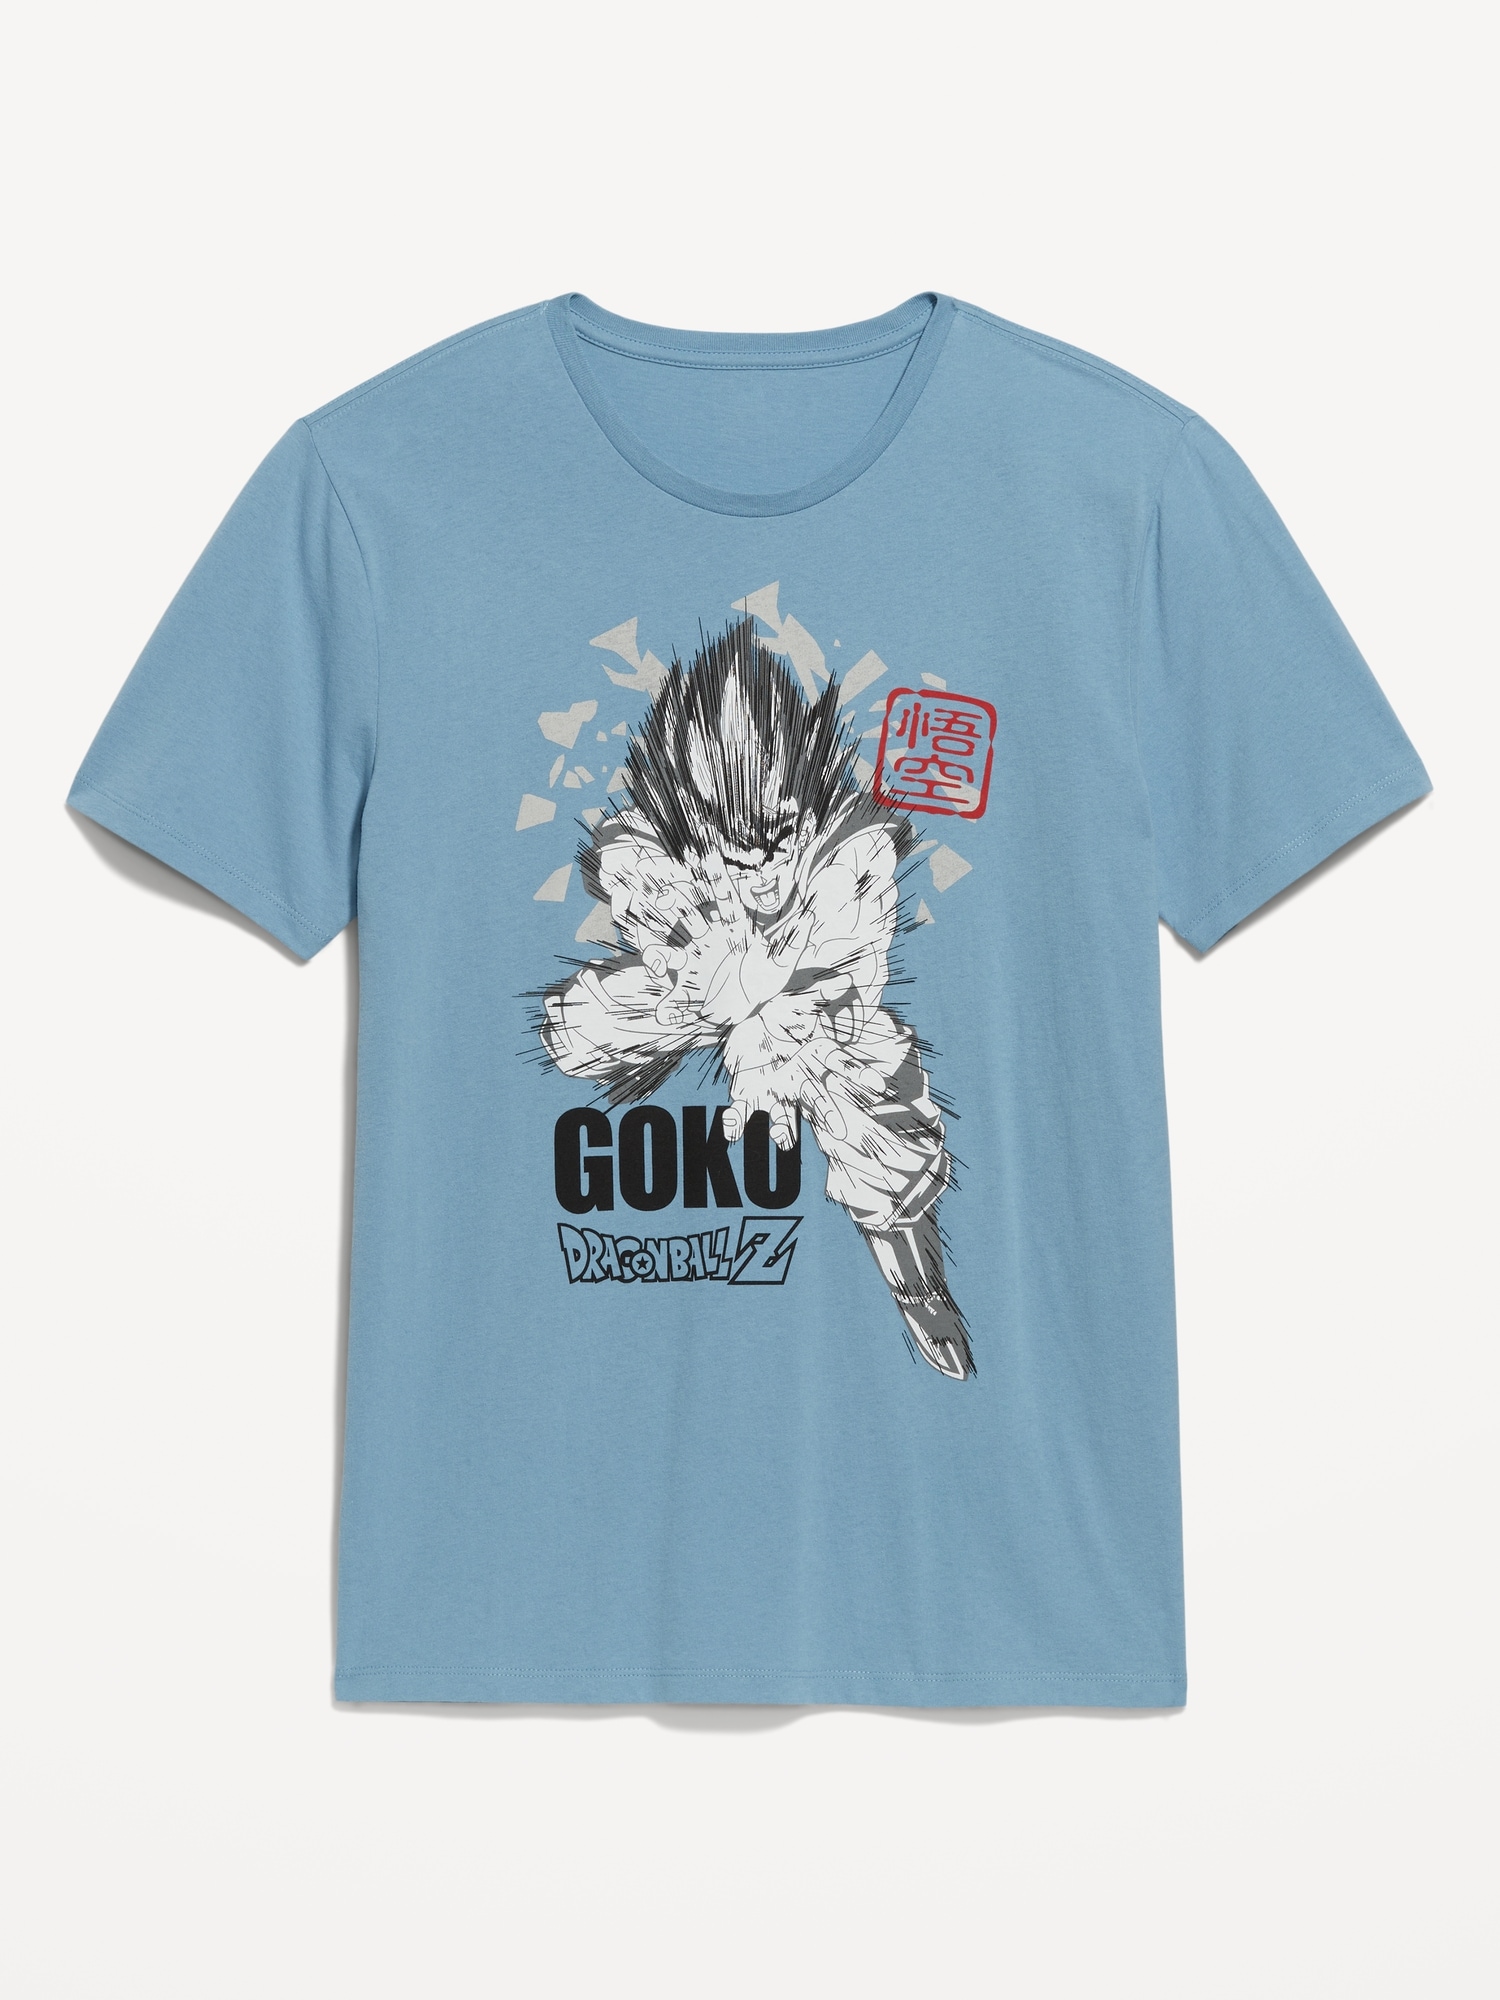 Dragon Ball Z Gender-Neutral T-Shirt for Adults